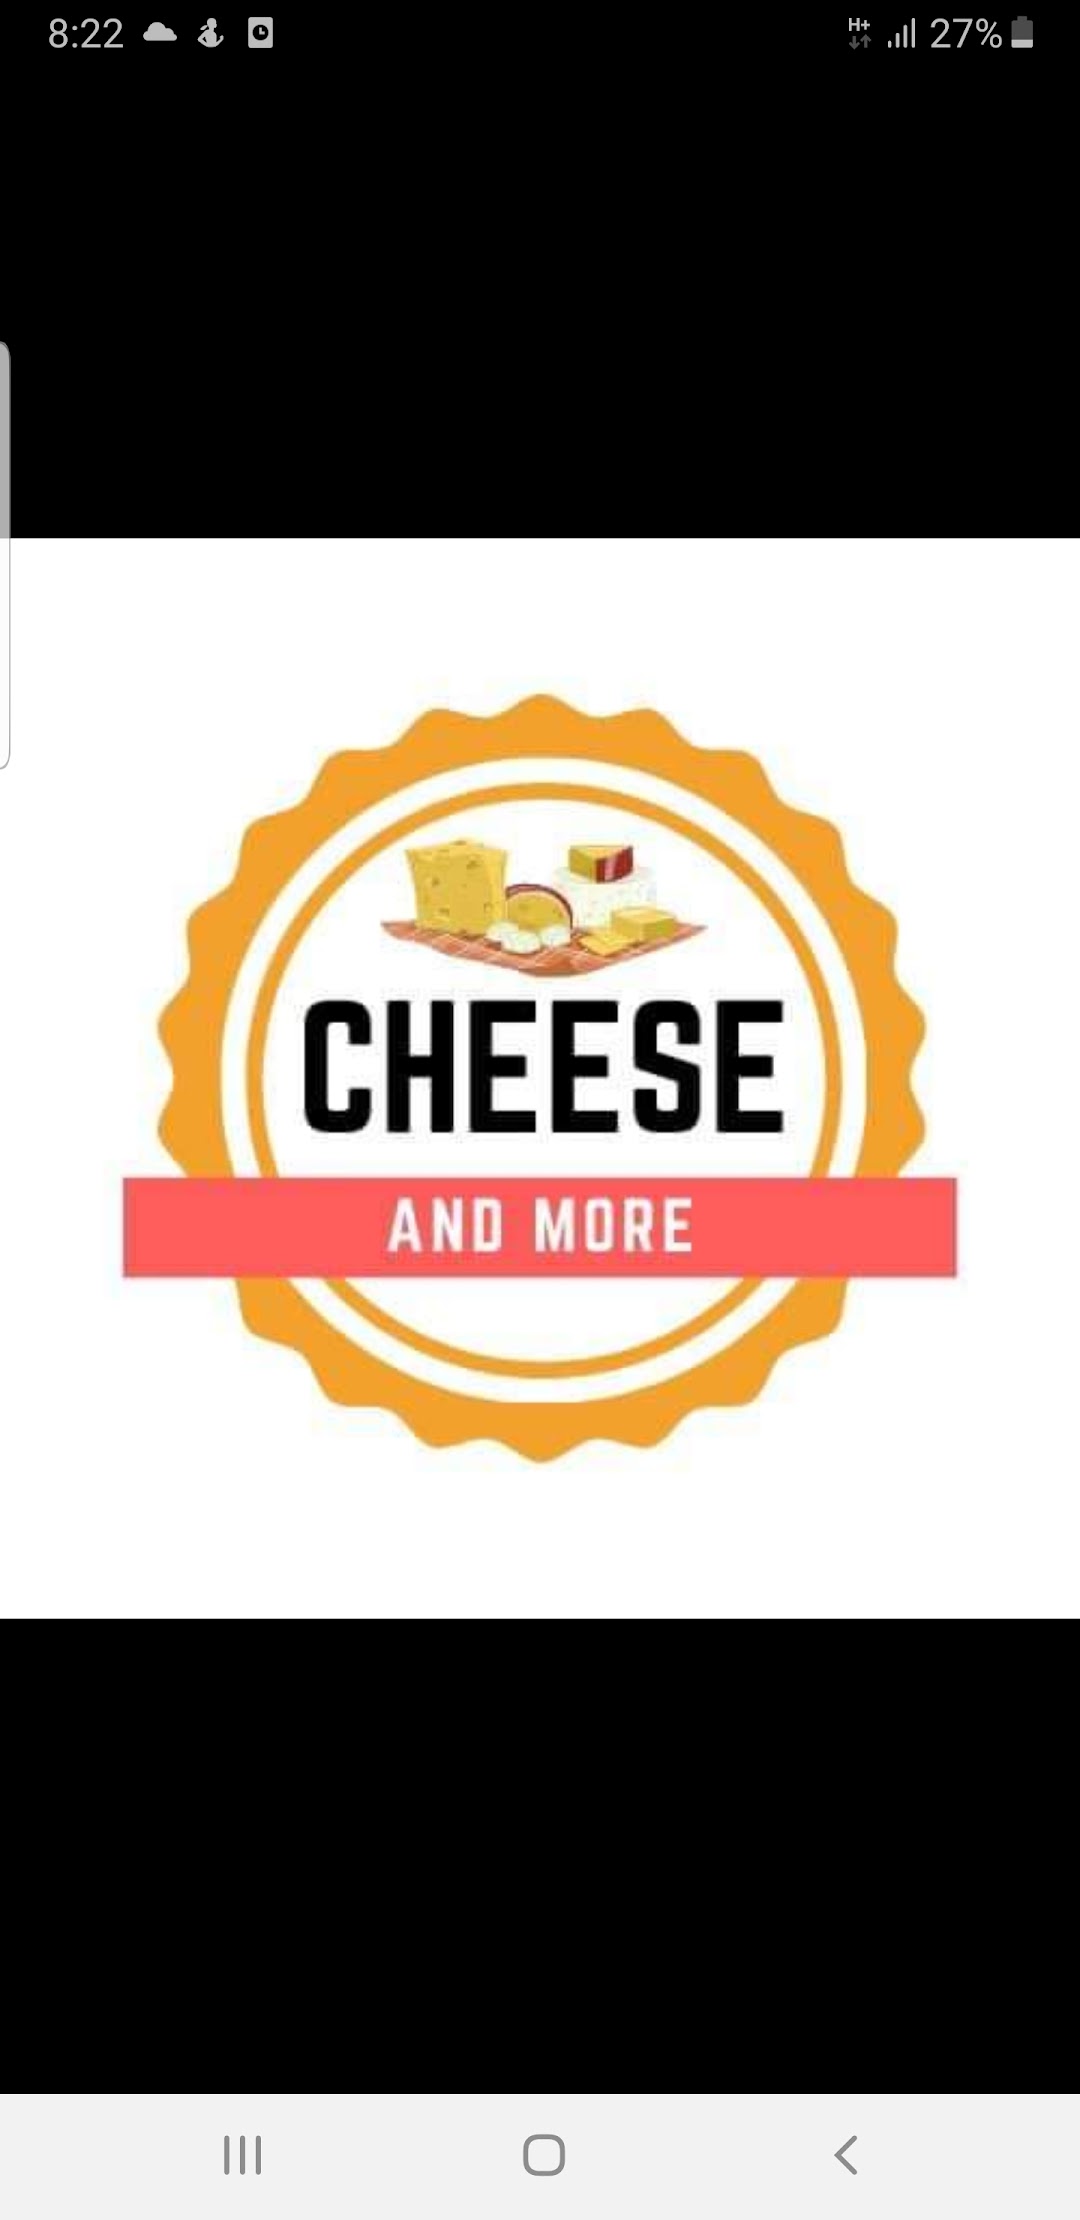 Cheese and more